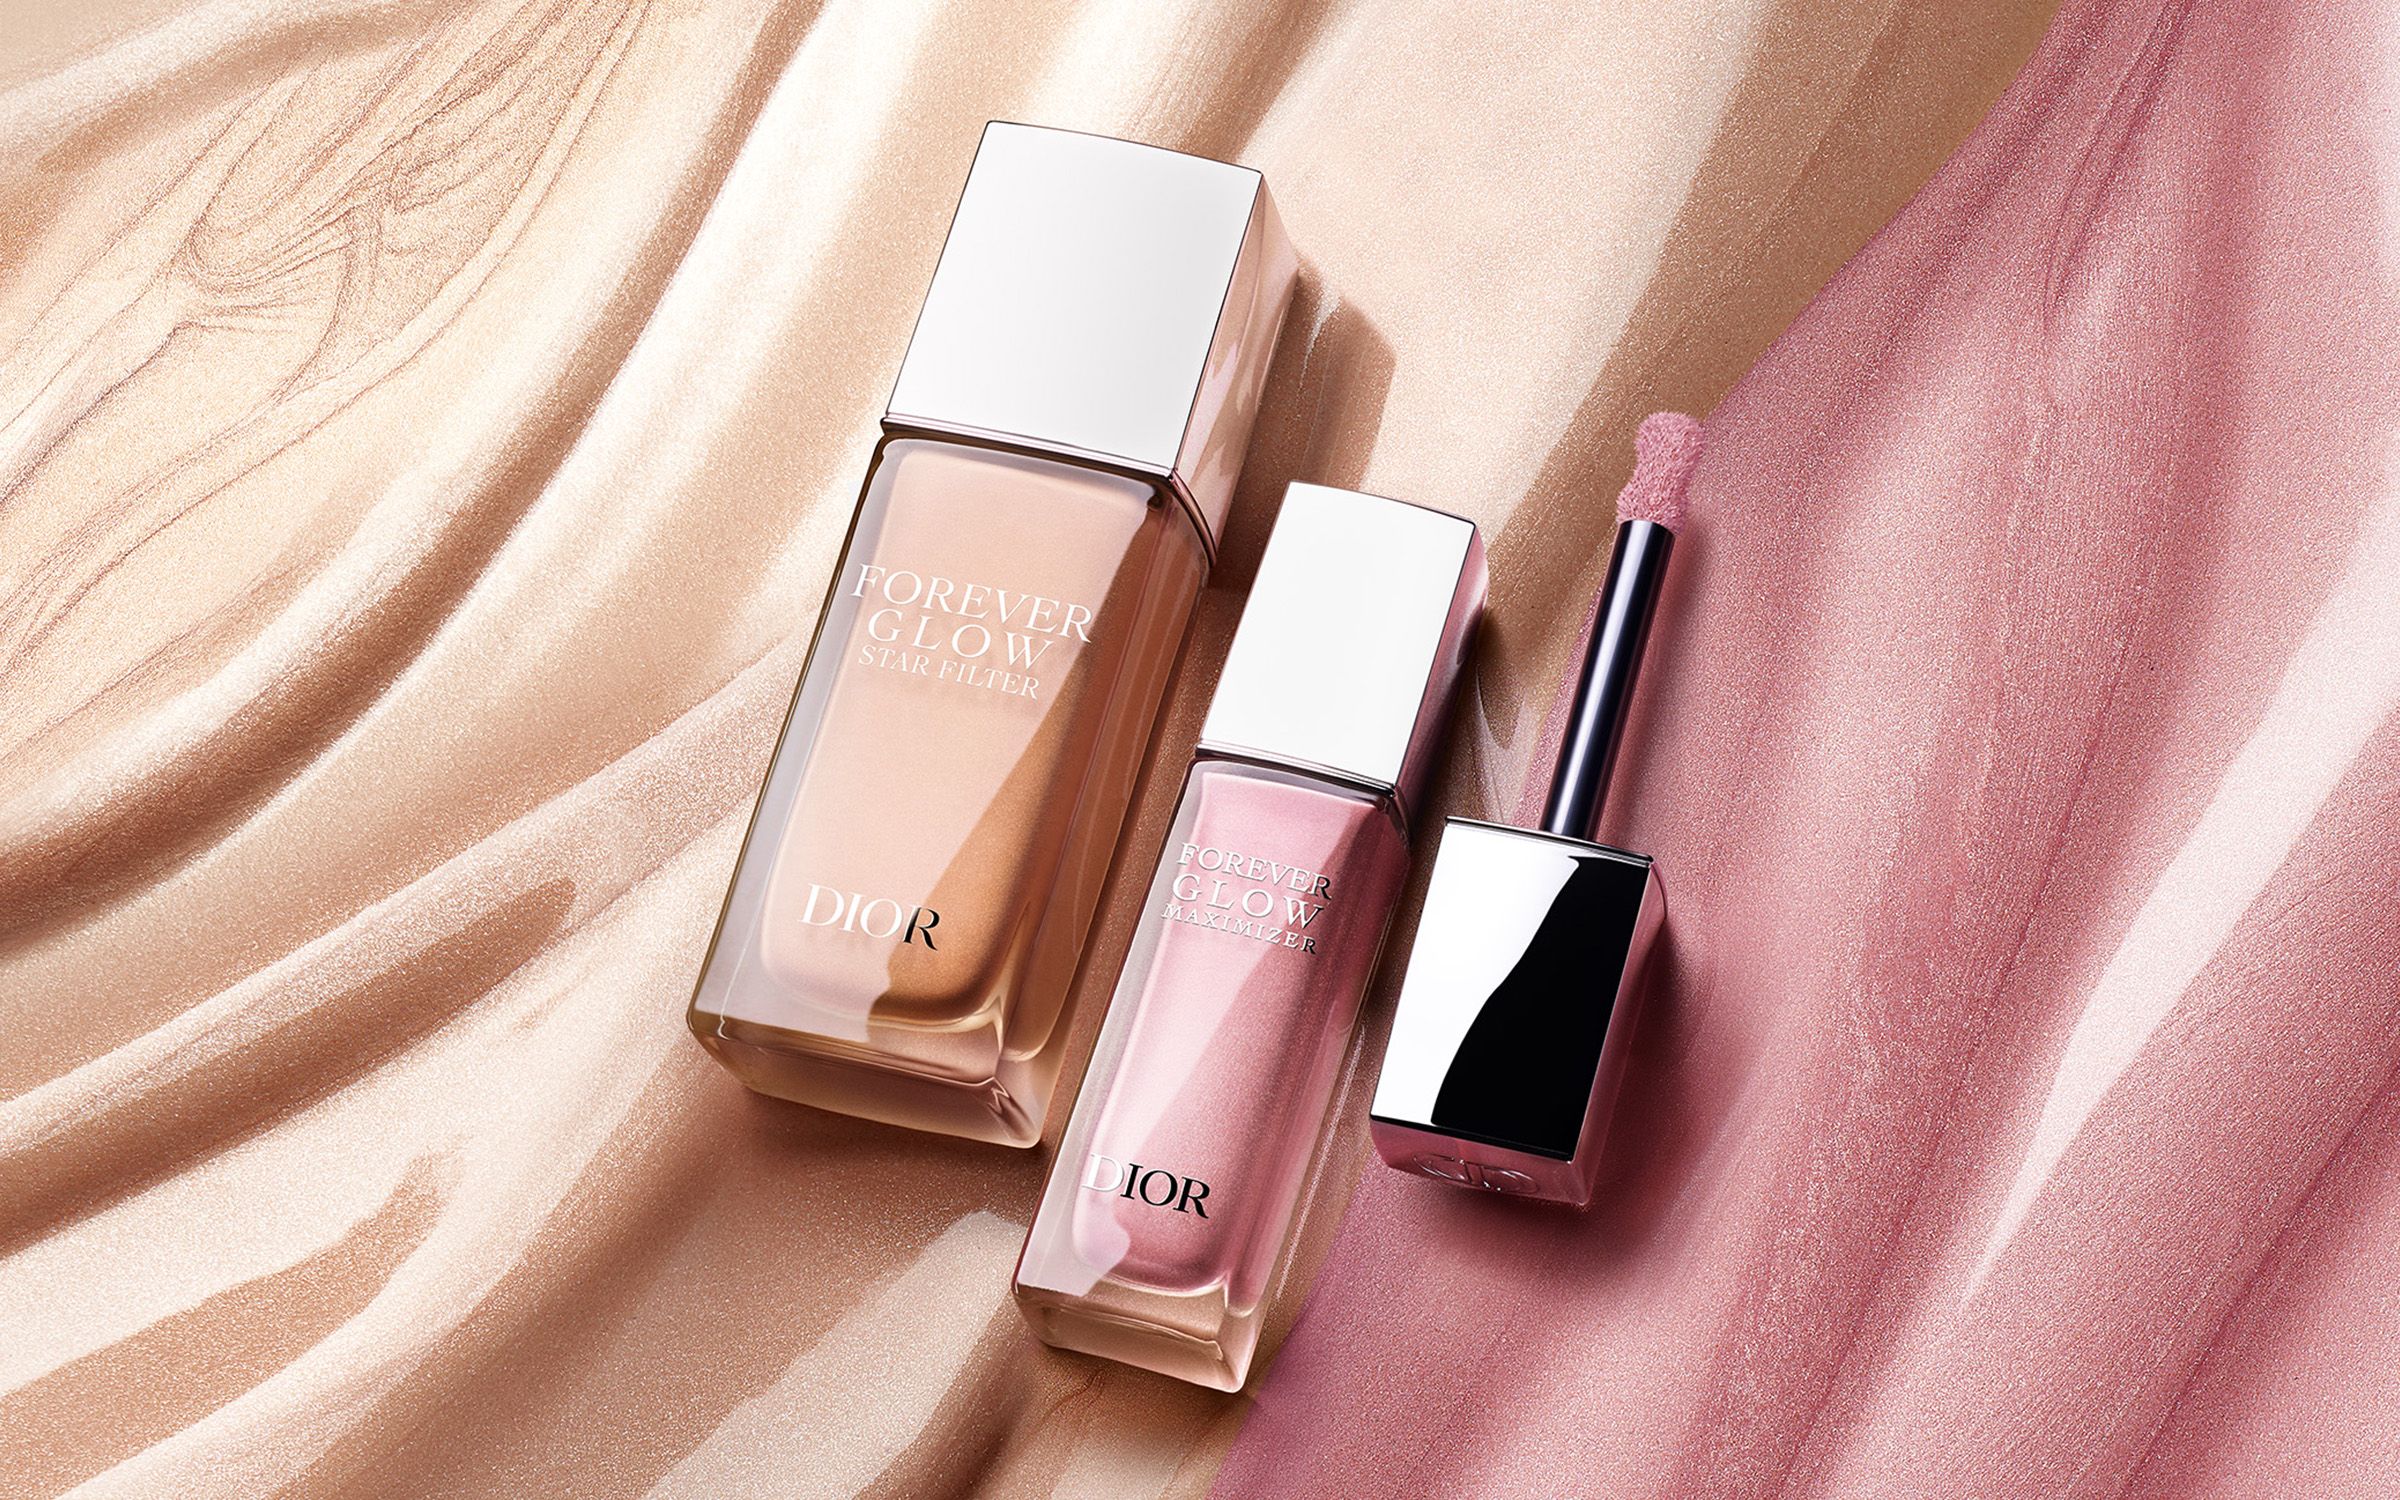 On trial: DIOR Forever Glow Maximiser and Star Filter